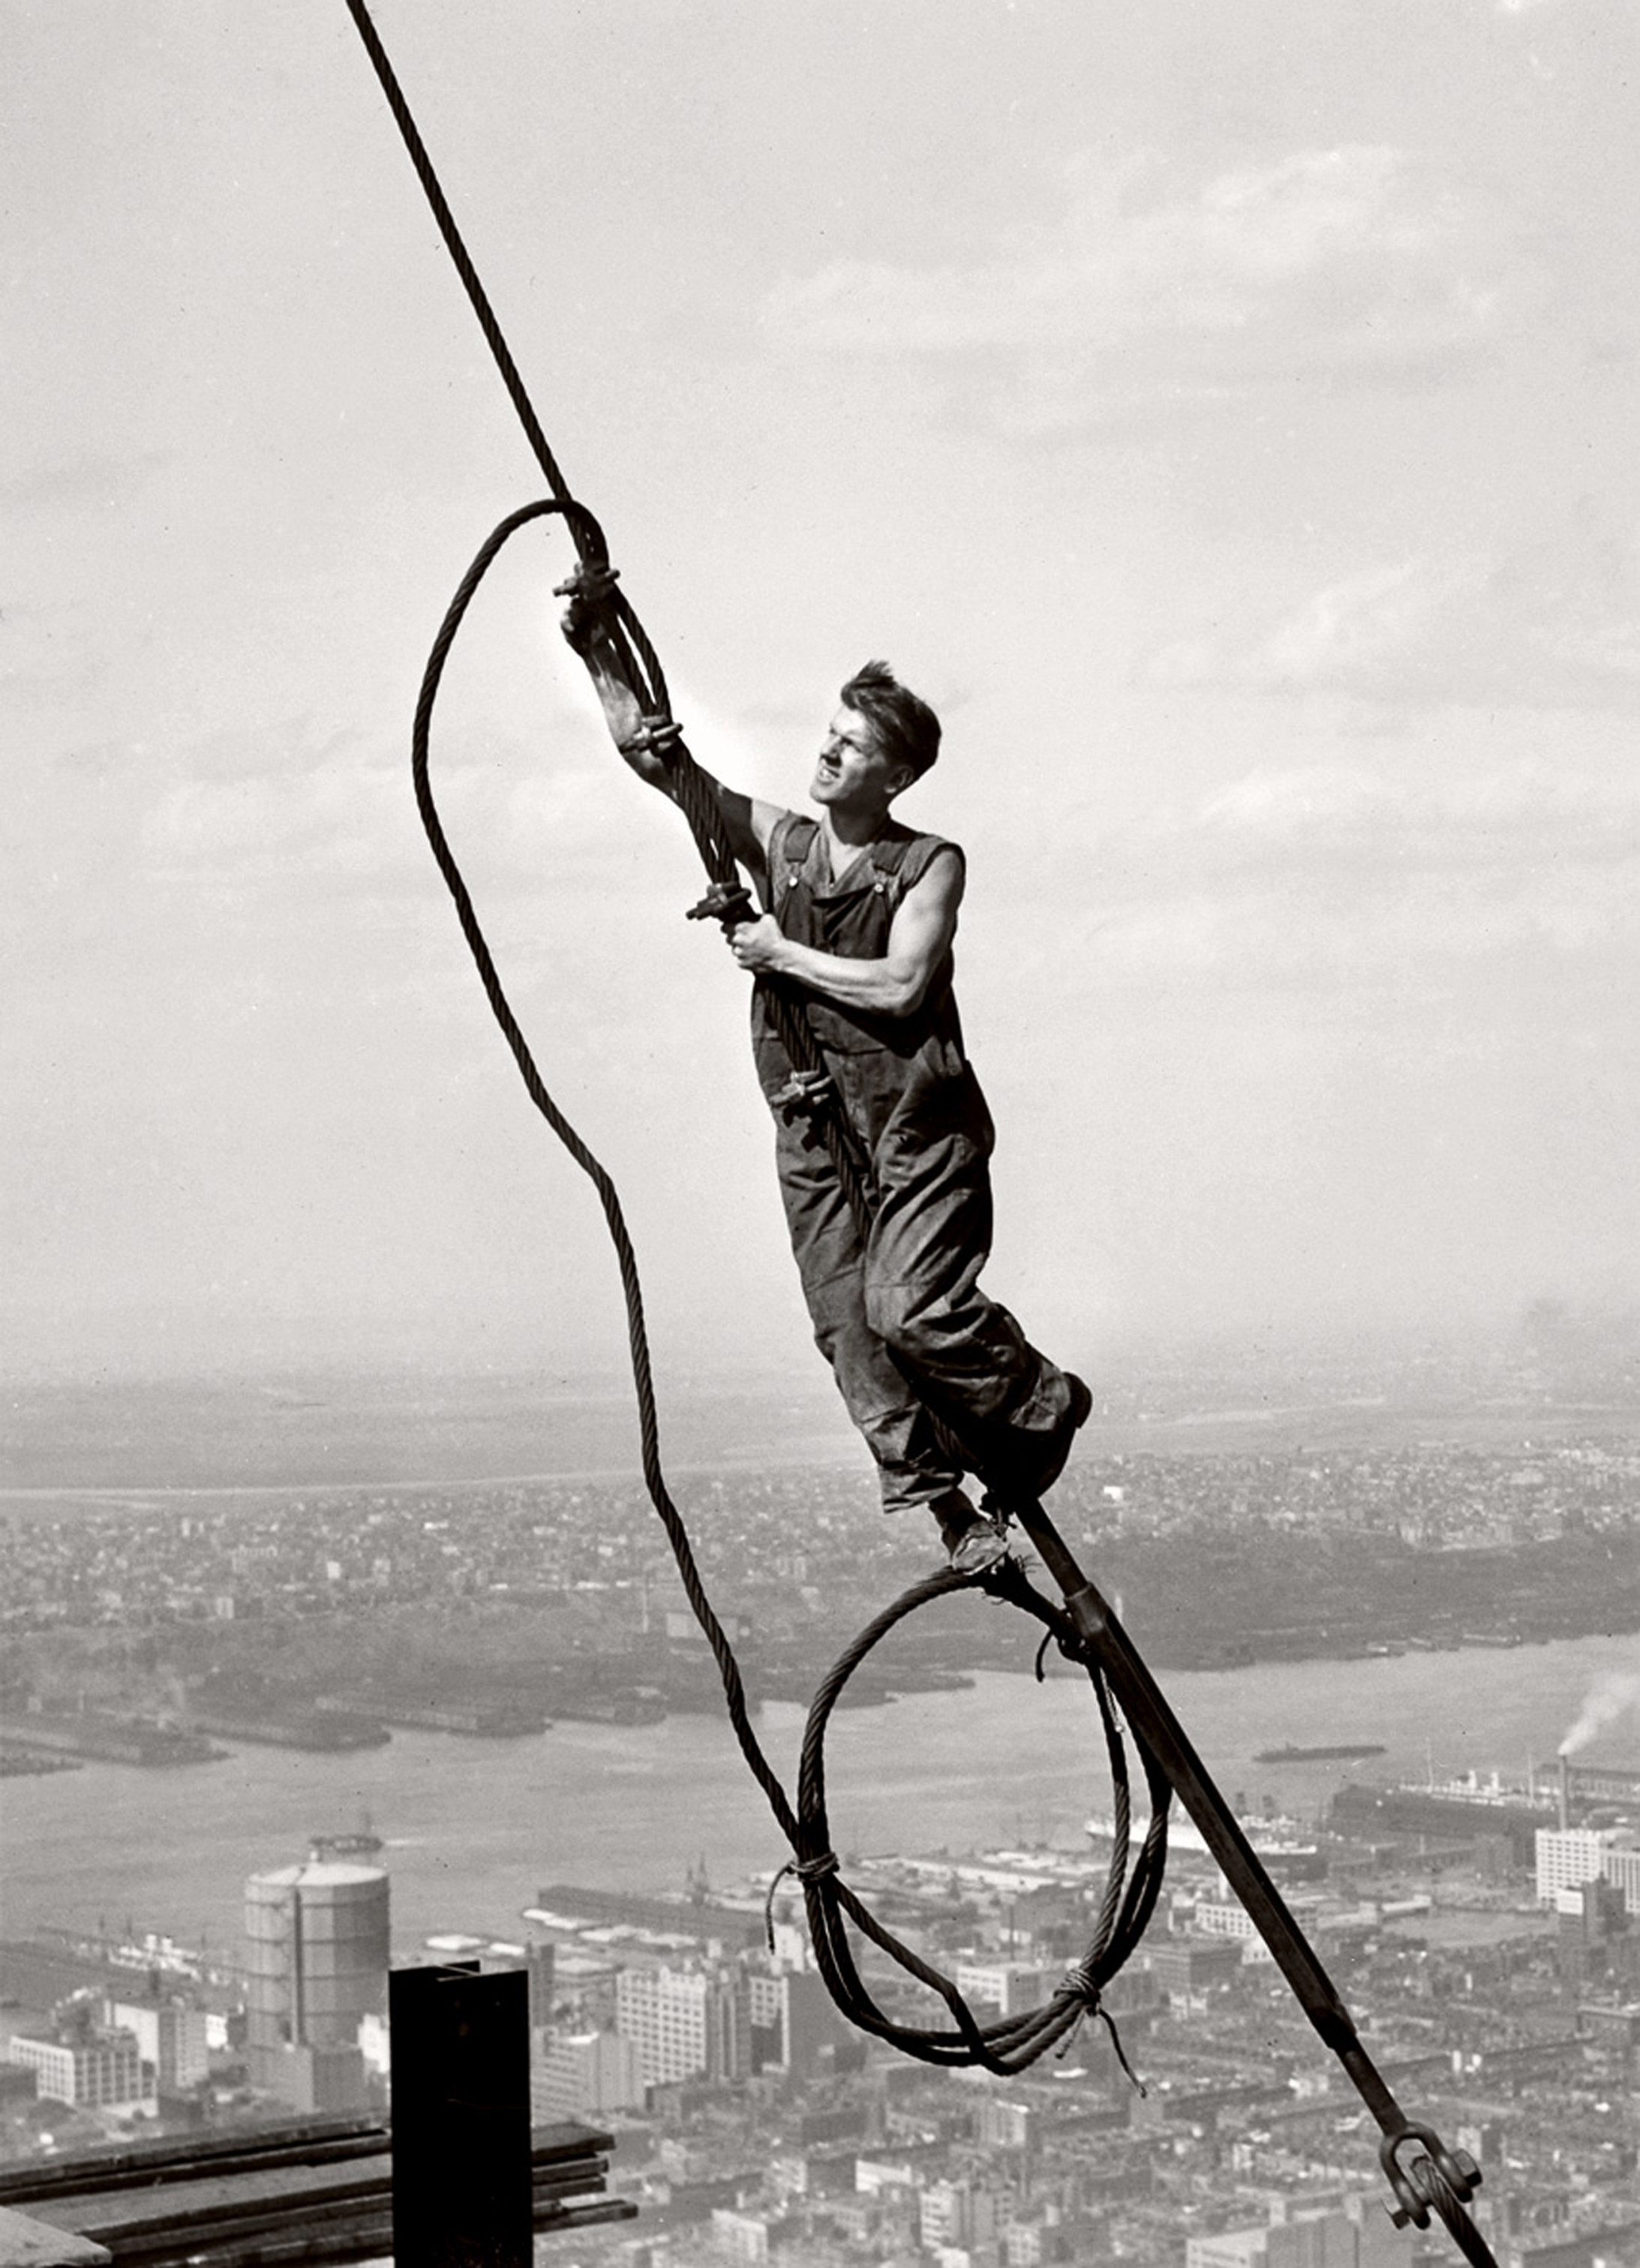 Lewis Hine,
Icarus atop Empire State Building (Ikarus auf der Spitze des Empire State Building), 1931
Silbergelatine-Abzug, 9.3 x 10 cm
© Sammlung des George Eastman House, Rochester